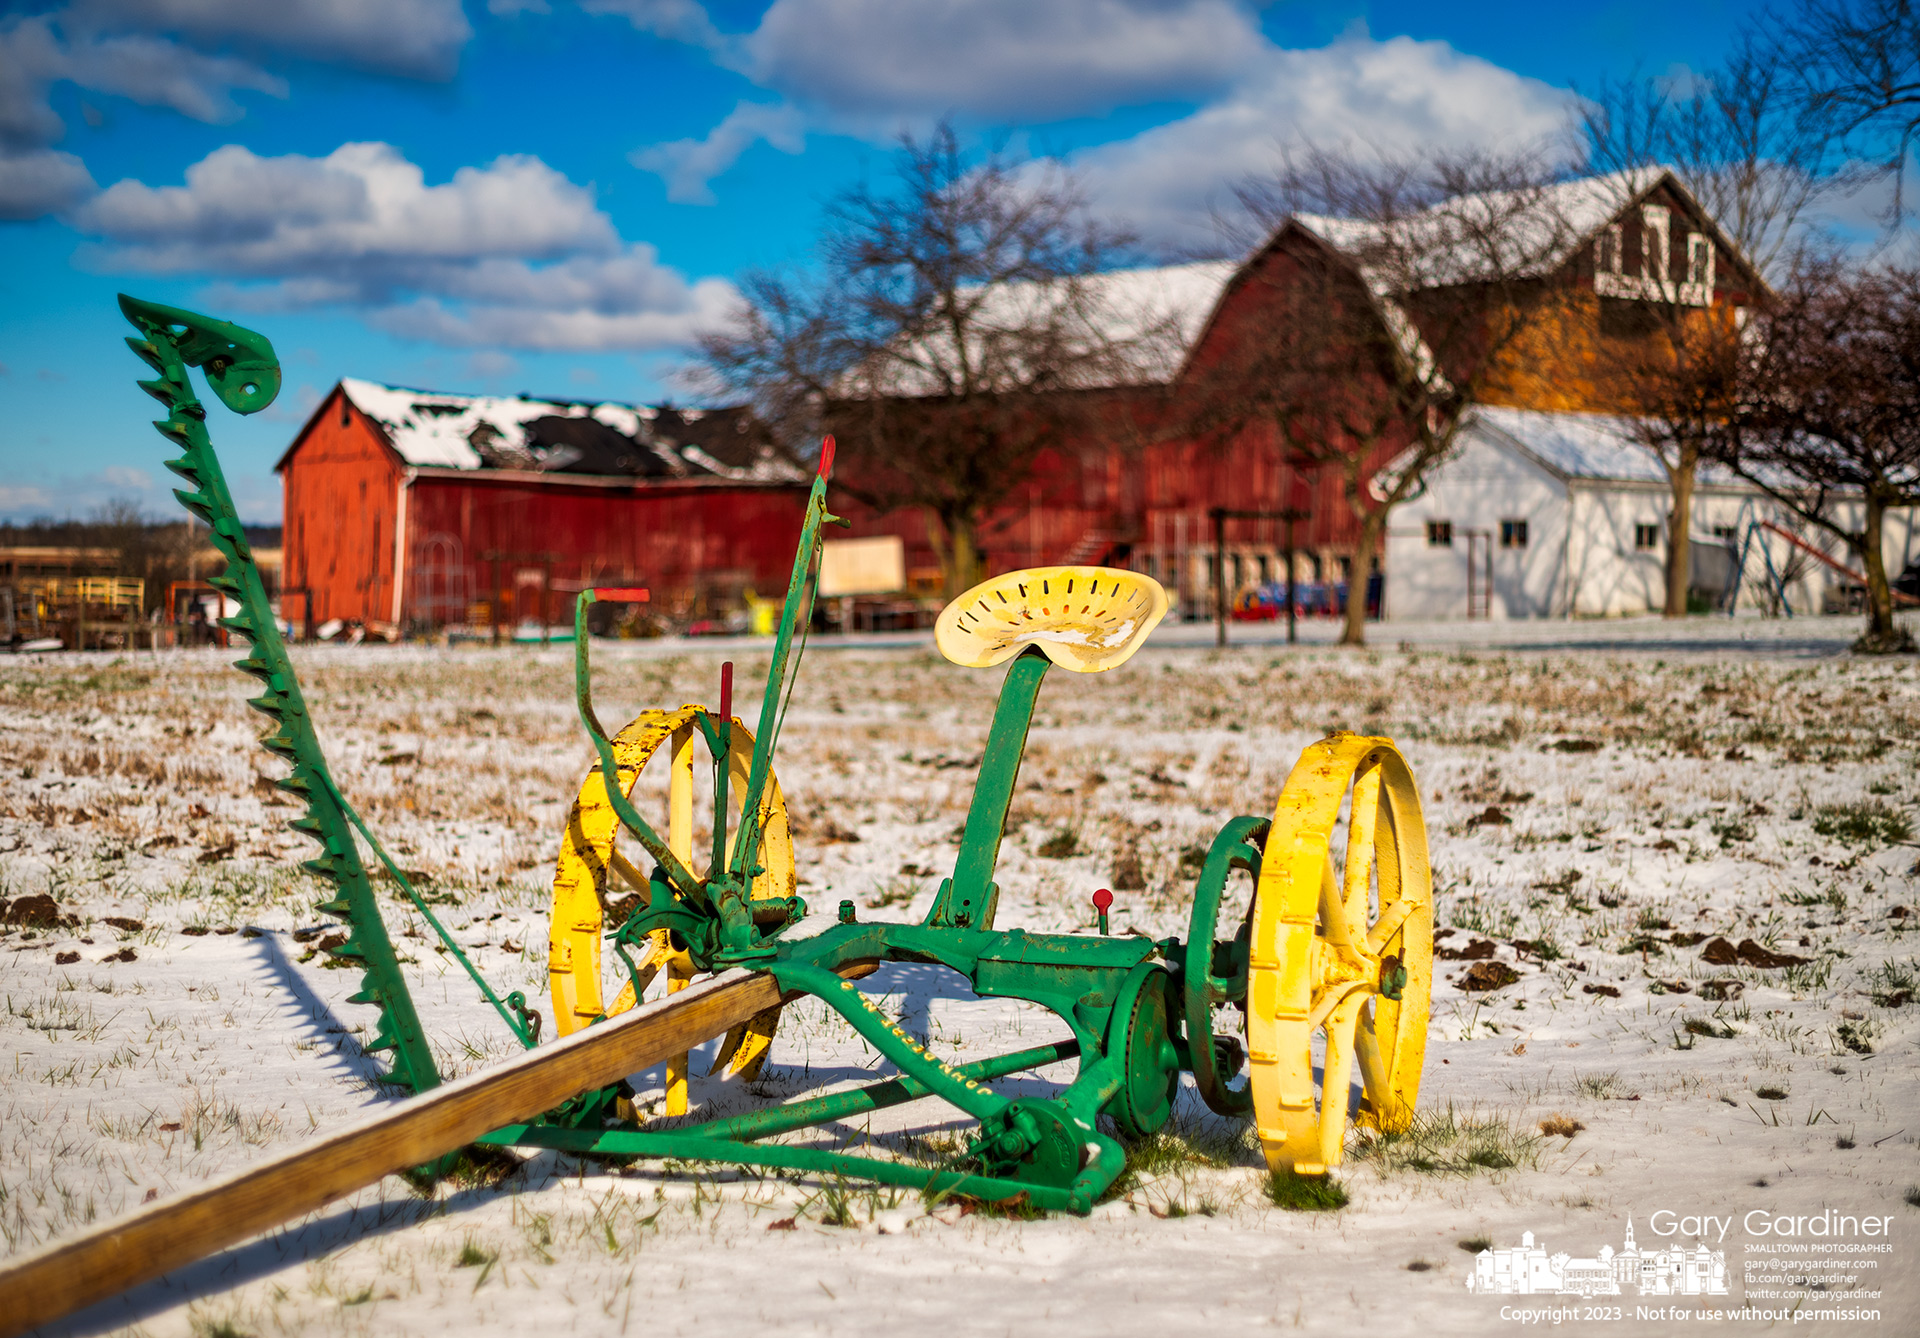 The morning sun casts a bright sharp light over an antique sickle mower sitting at the edge of a snowy garden and field at the Yarnell Farm on Africa road. My Final Photo for March 14, 2023.